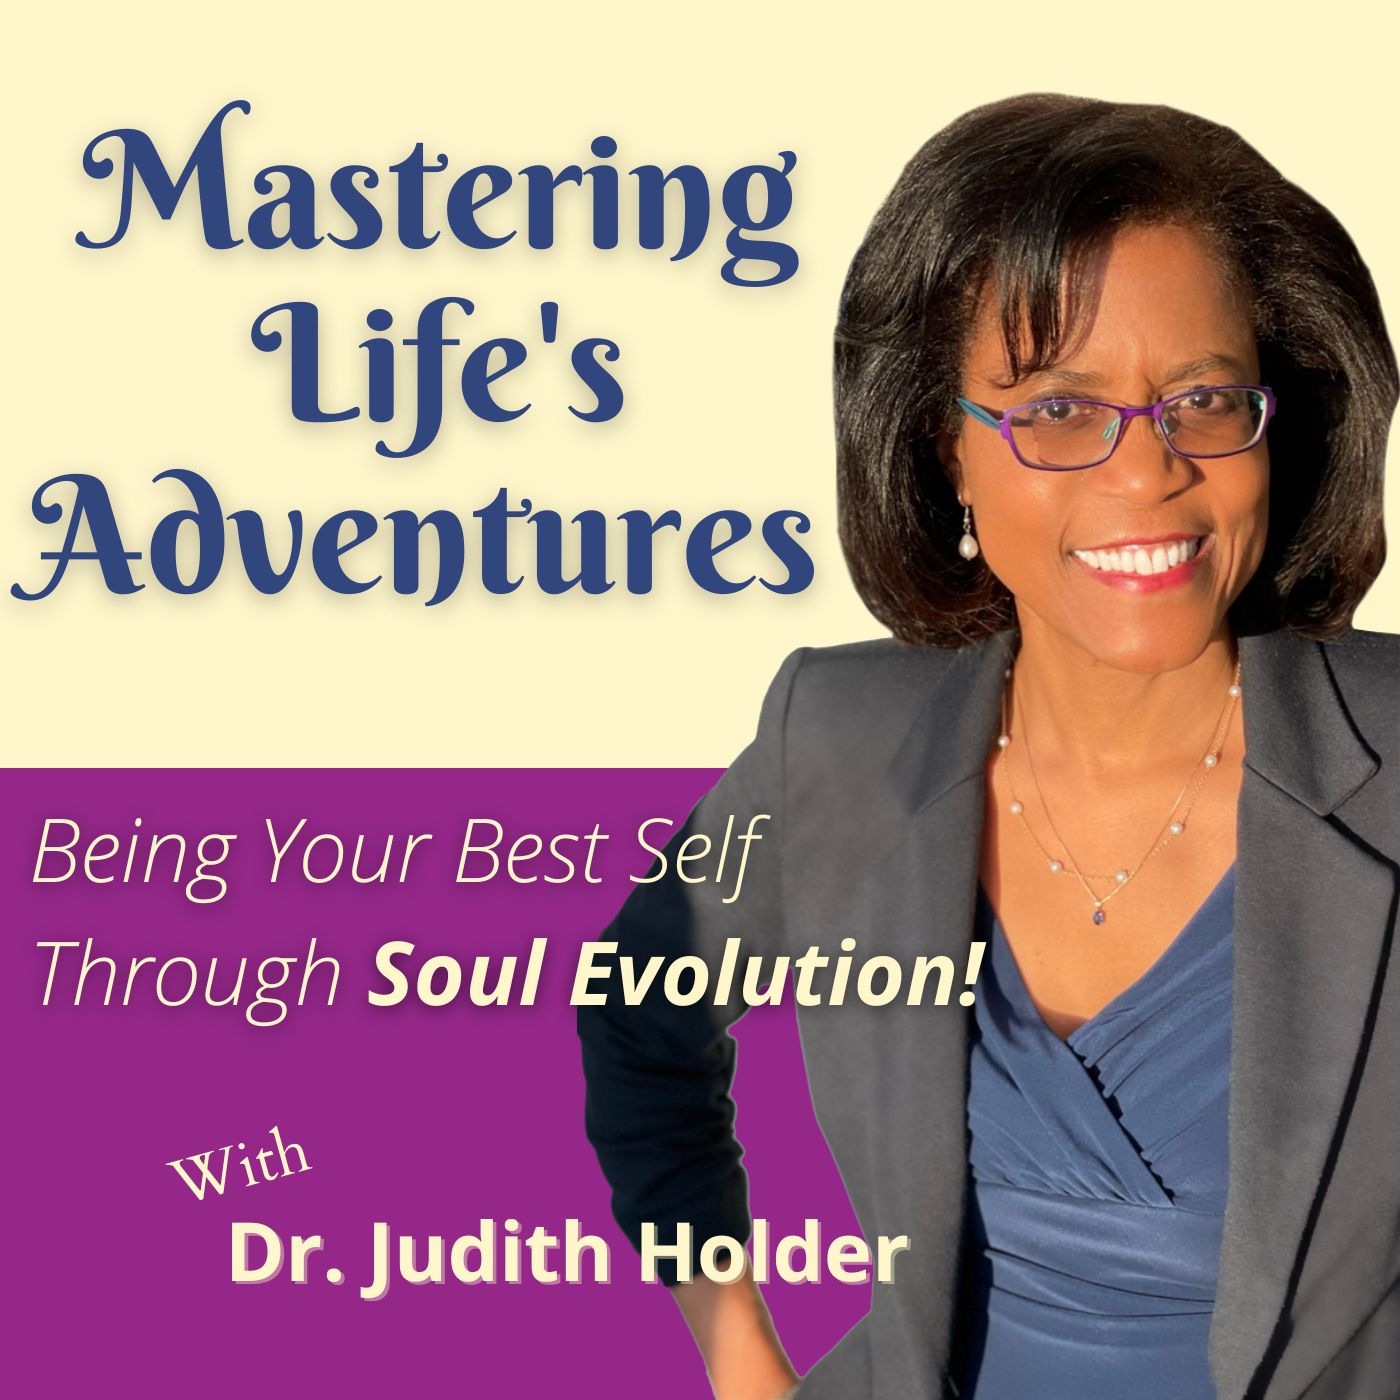 Mastering Life's Adventures: Being Your Best Self Through Soul Evolution!